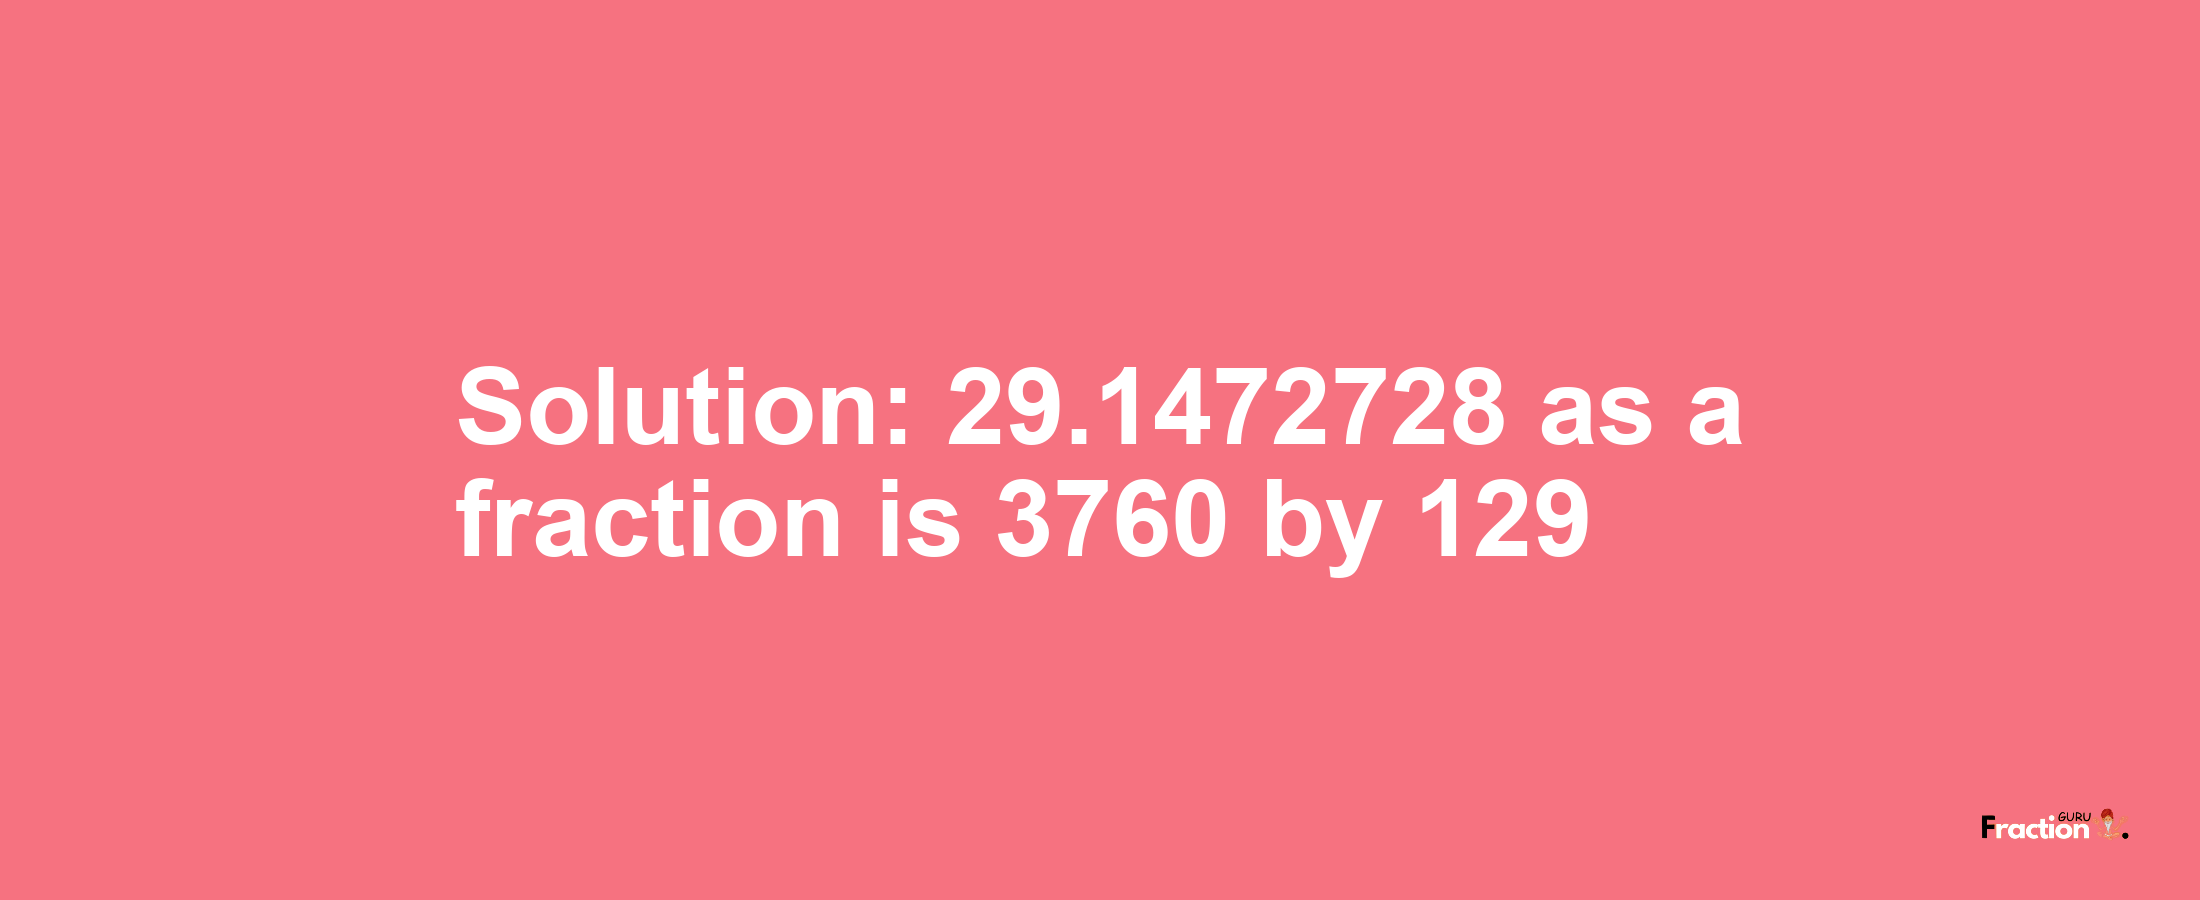 Solution:29.1472728 as a fraction is 3760/129